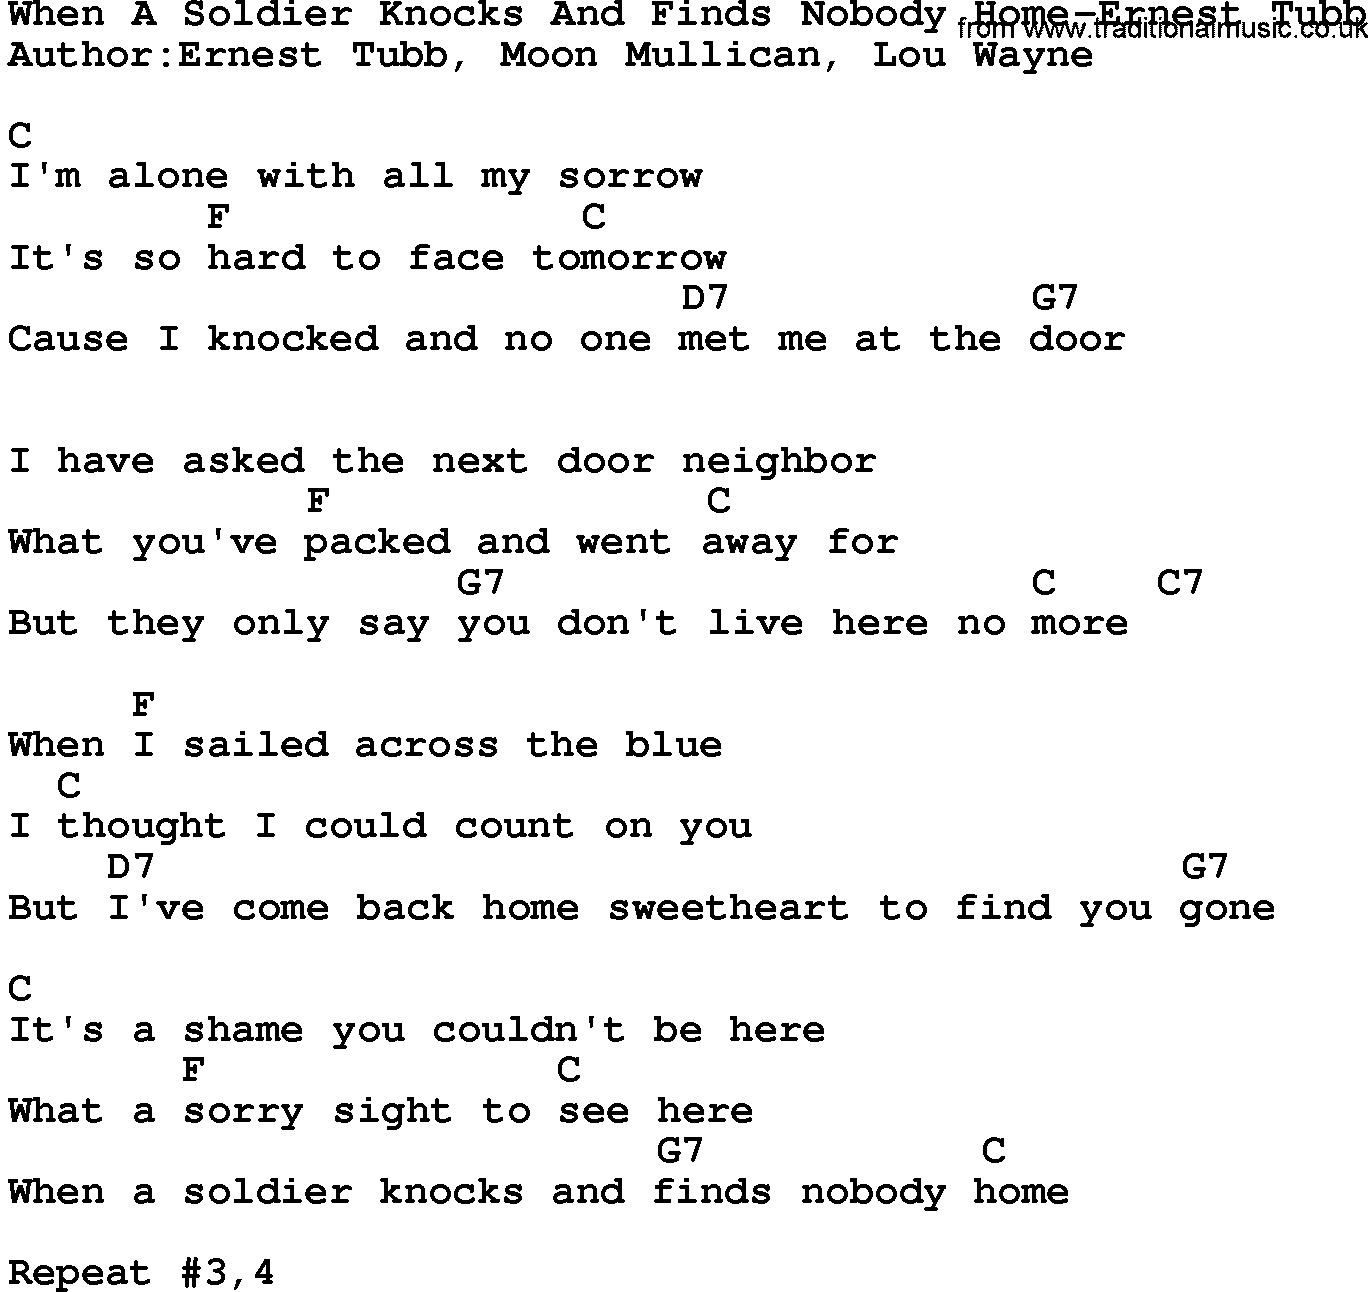 Country music song: When A Soldier Knocks And Finds Nobody Home-Ernest Tubb lyrics and chords